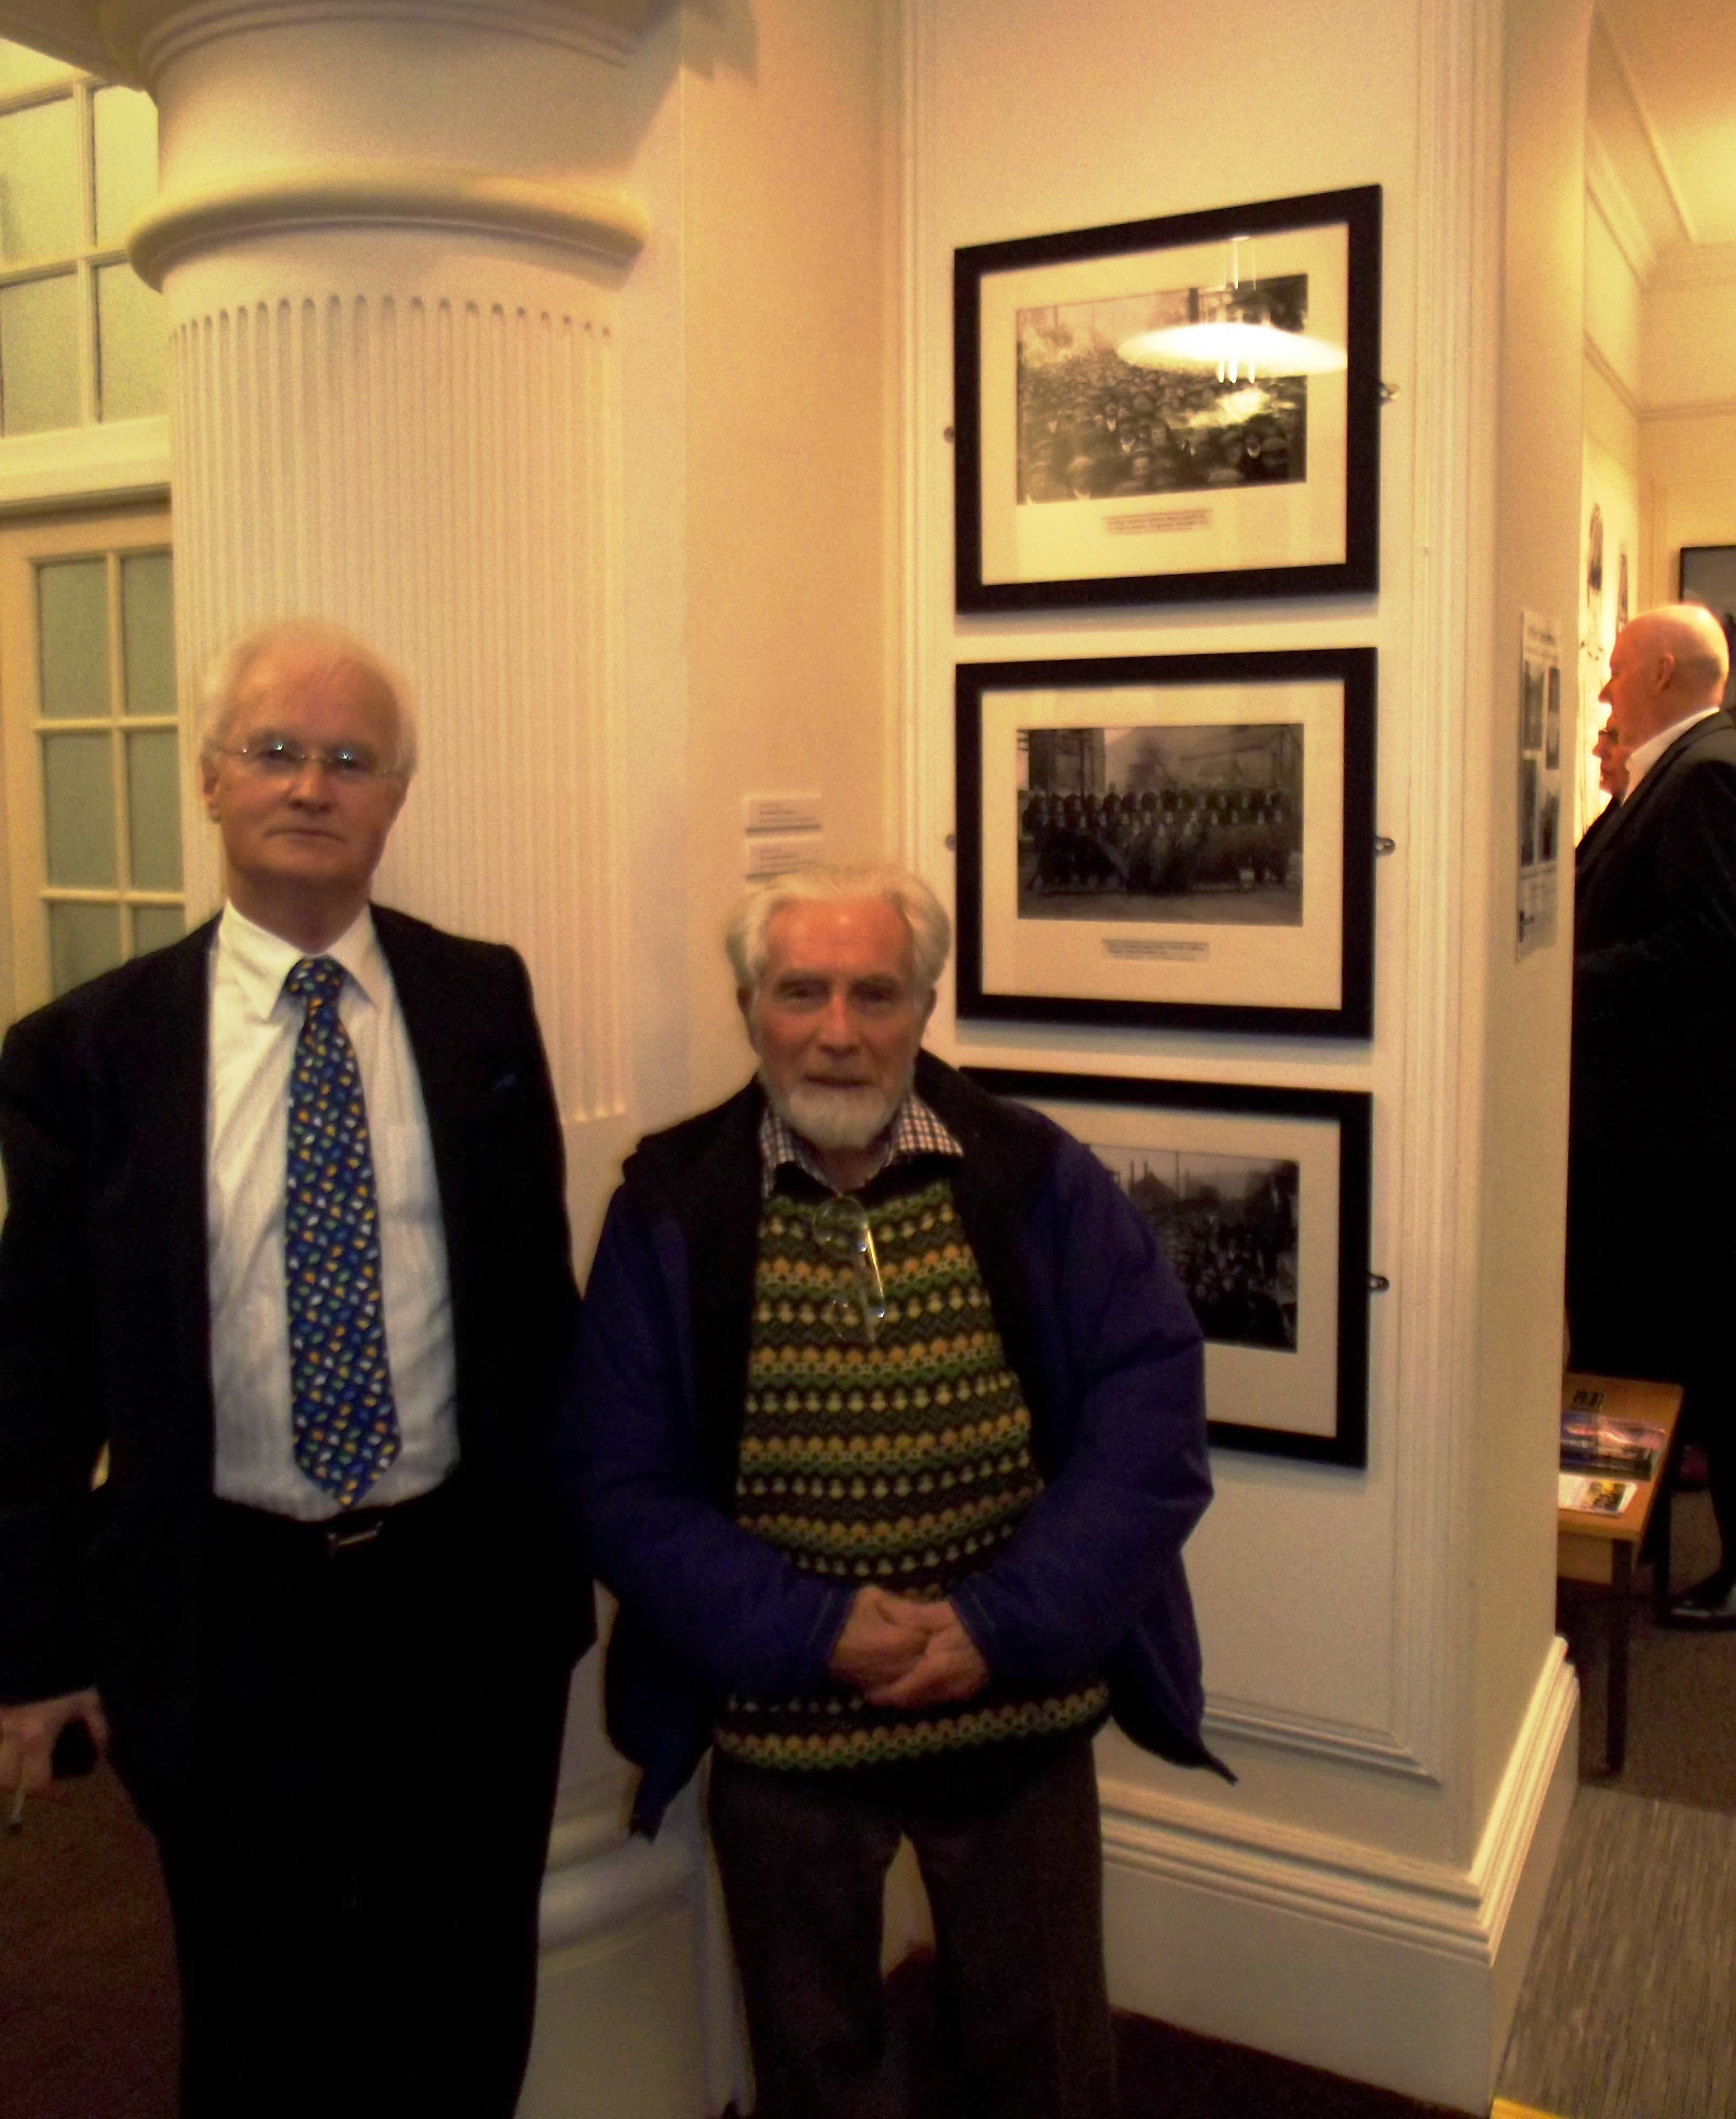 David Maddox and Gwyn Evans with their prints of Levi Ladd's 'Tonypandy Riots' photographs of 1910, Oriel y Bont 4 March 2014